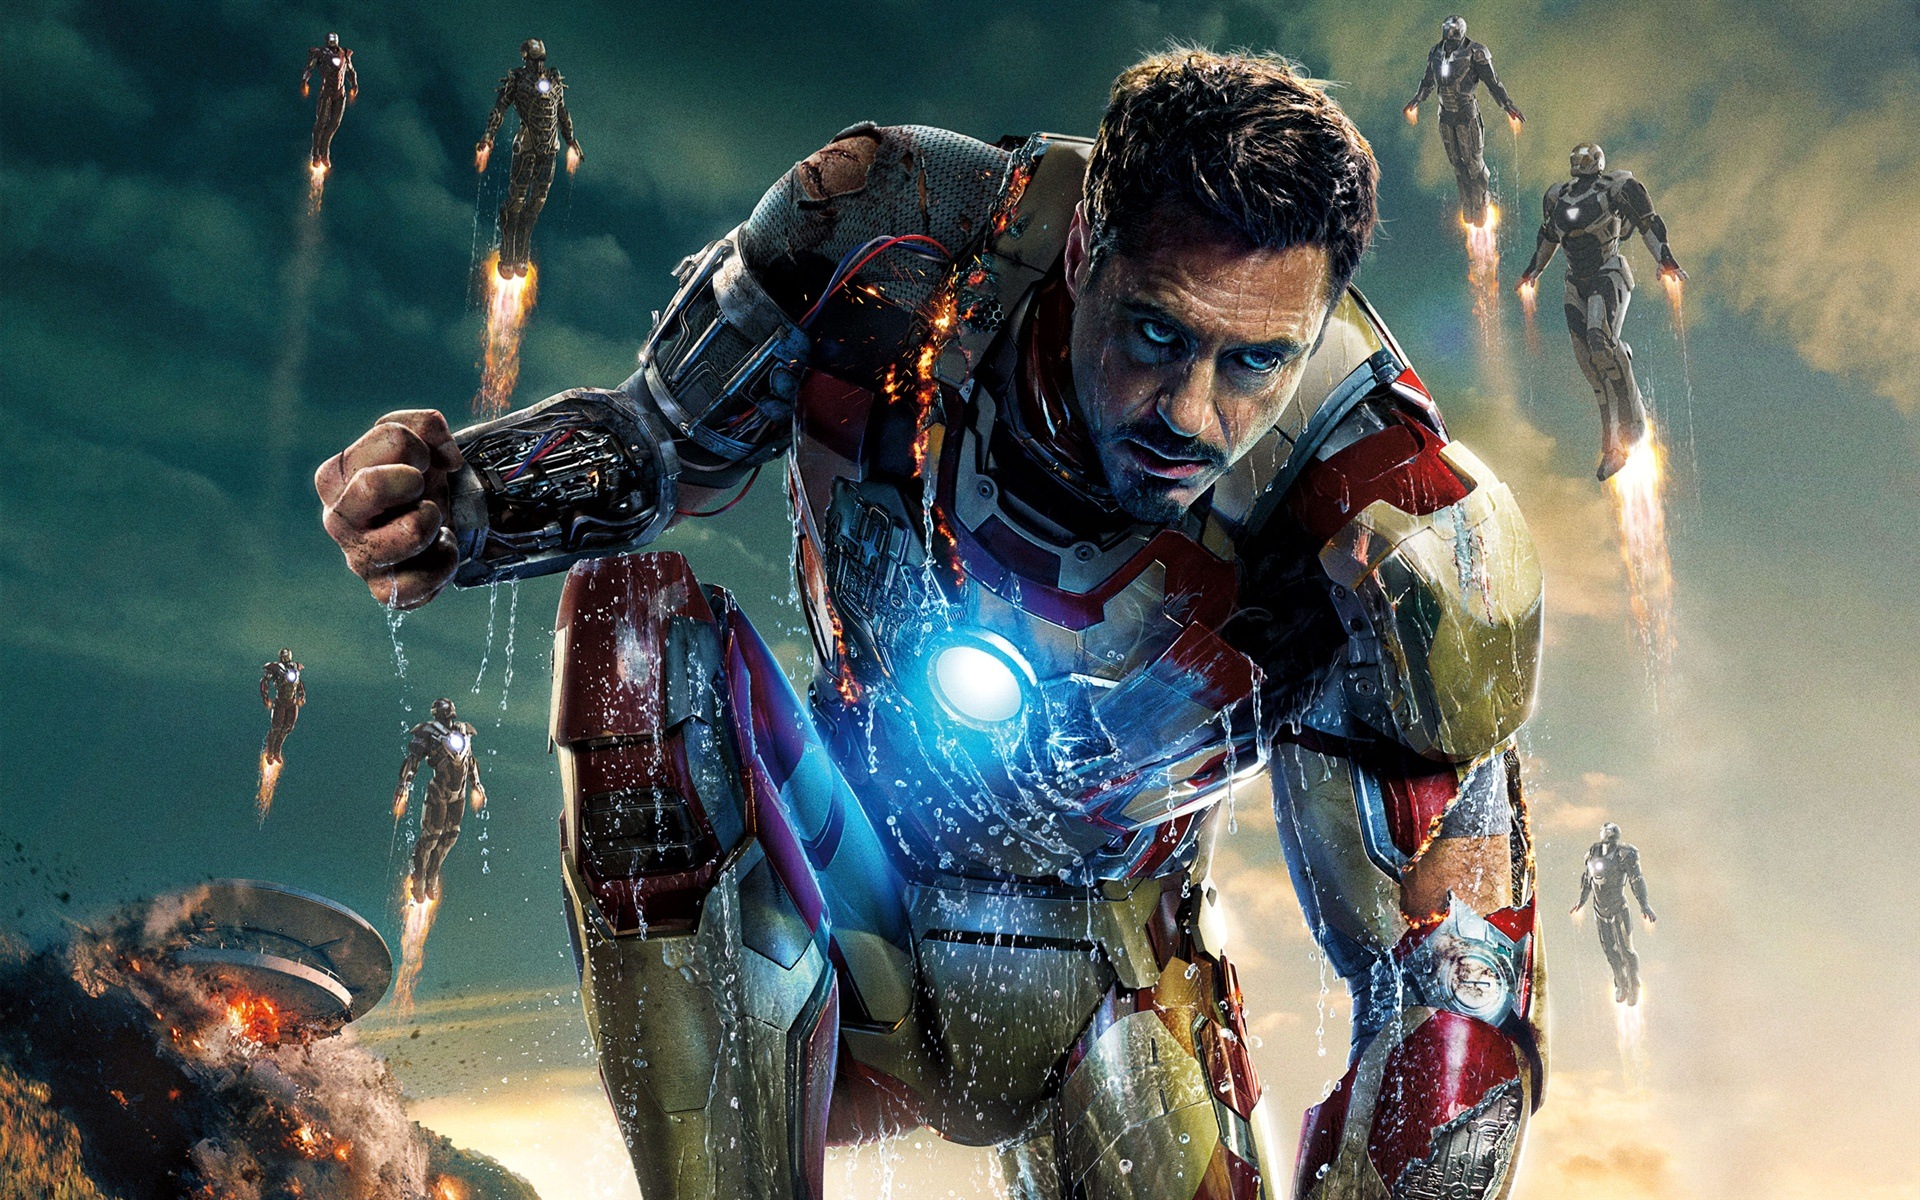 Iron Man 3 download the new version for android